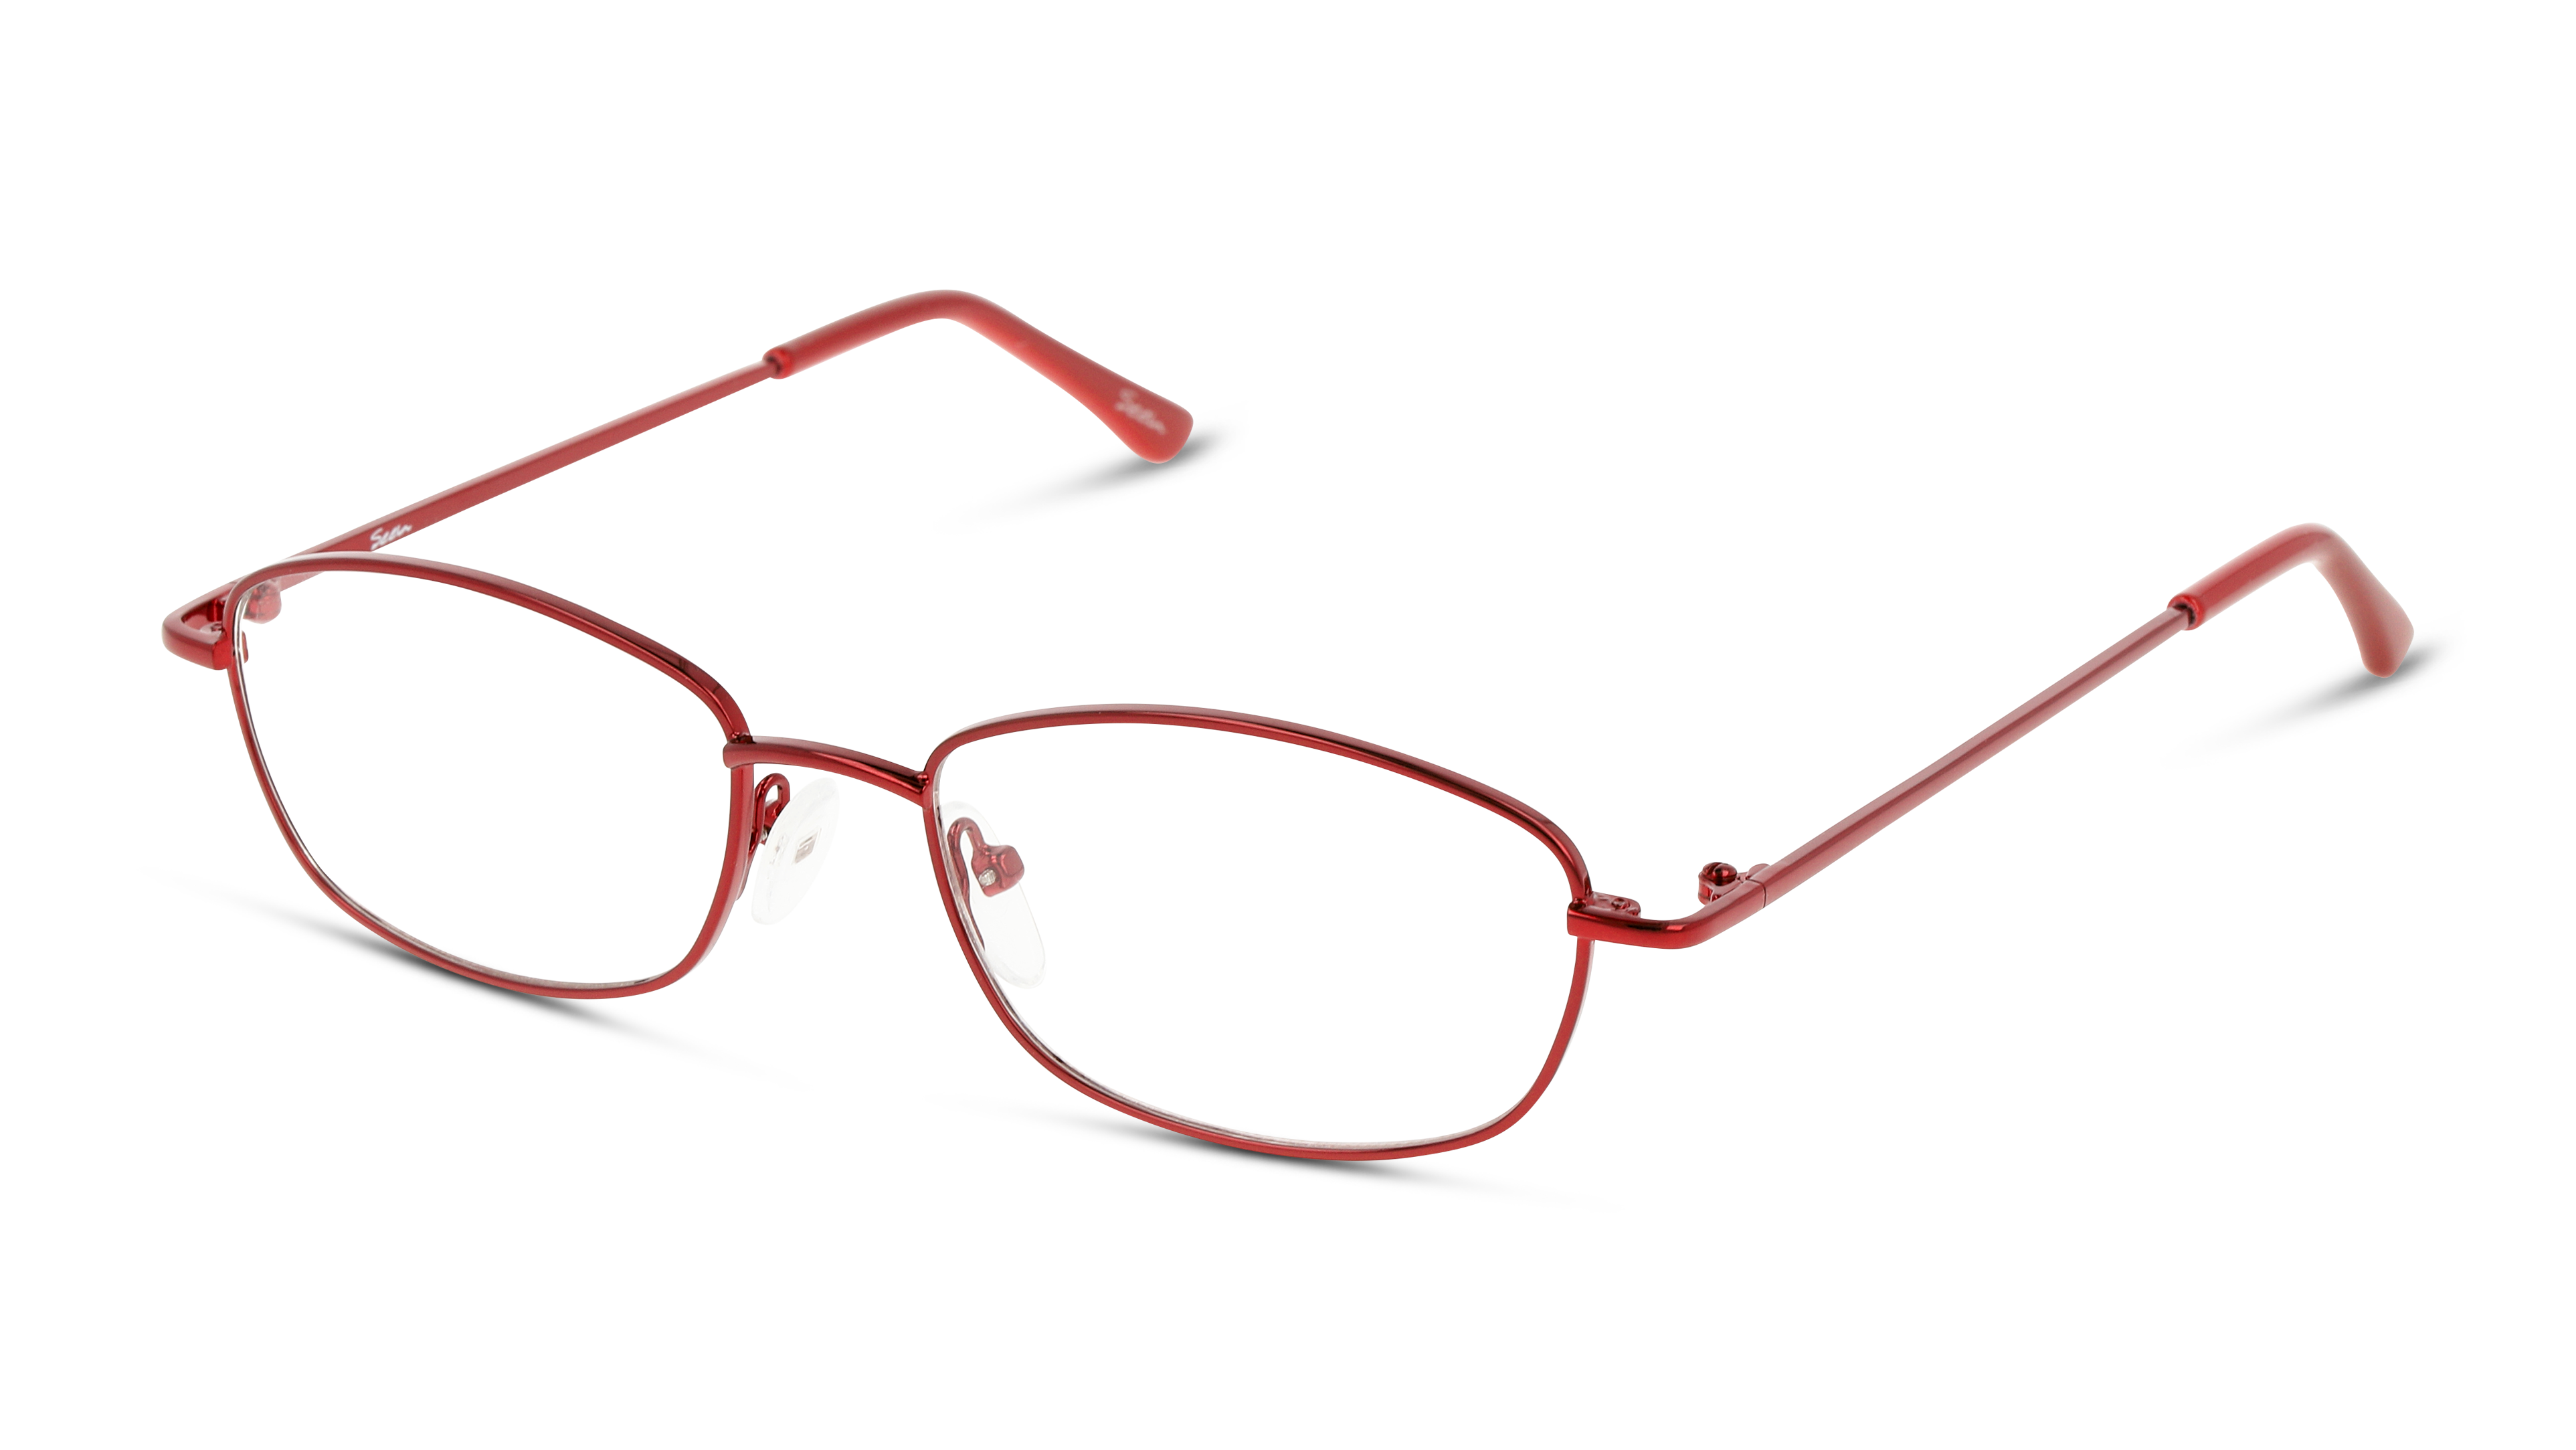 Angle_Left01 Seen SN DF03 (RR00) Glasses Transparent / Red